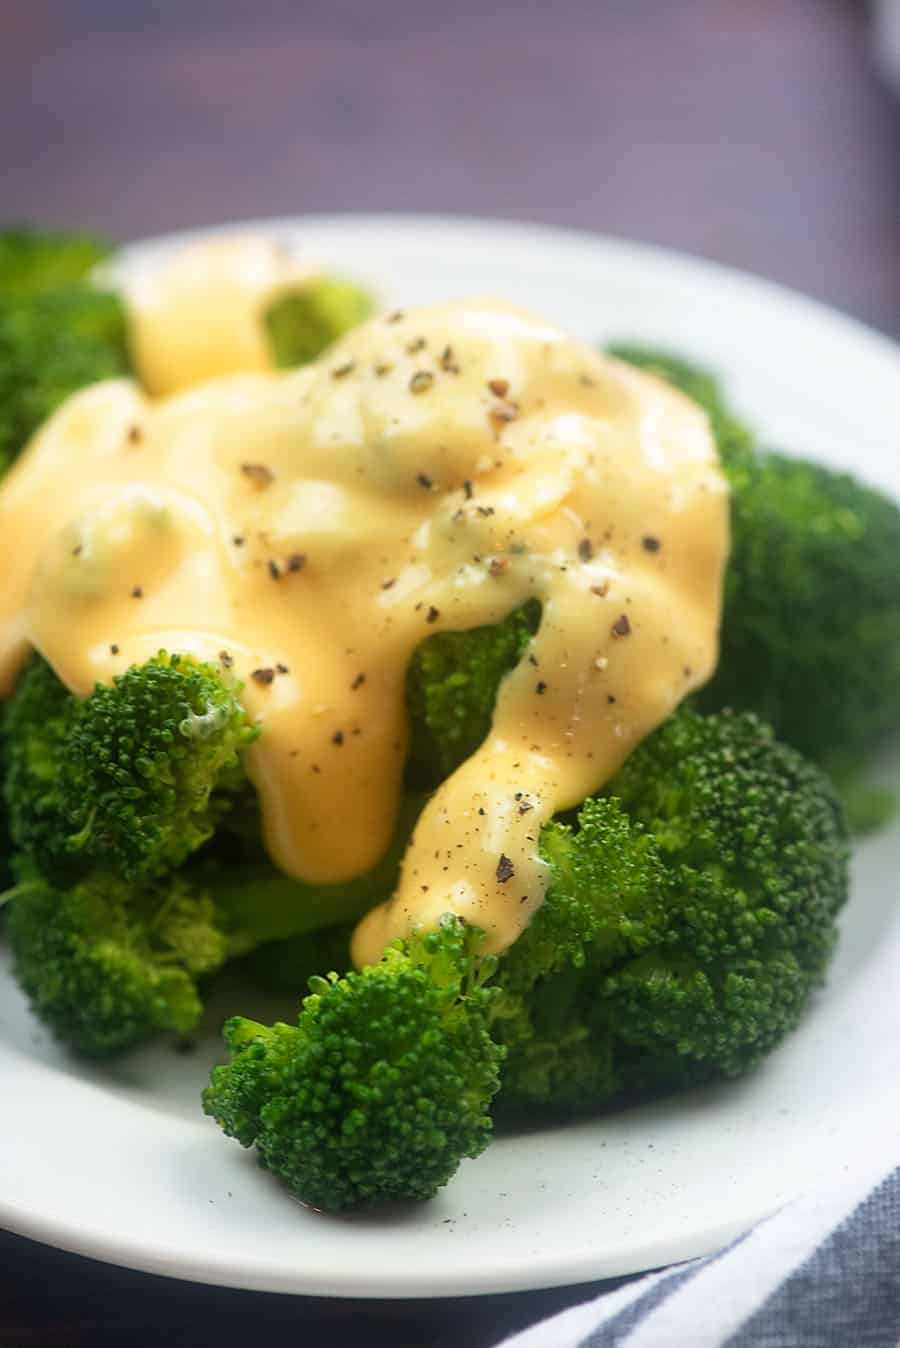 A plate of broccoli topped with cheese sauce